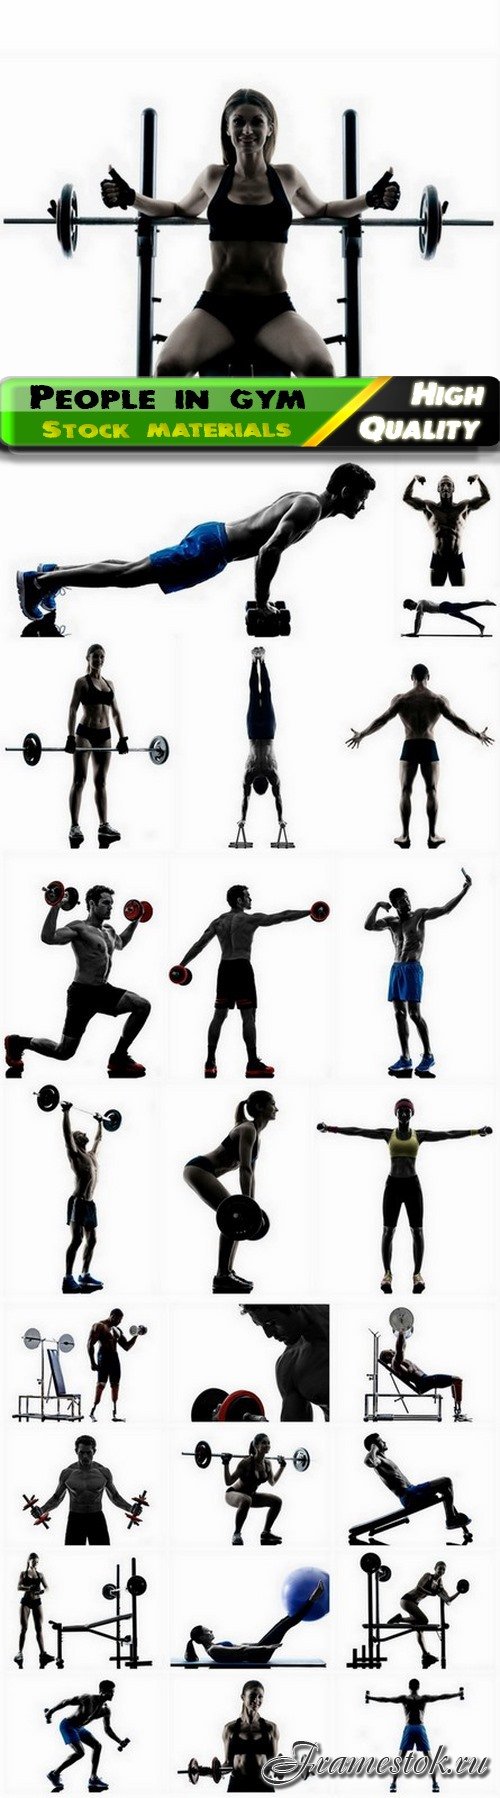 Silhouettes of man and woman who work hard in sport gym - 25 HQ Jpg